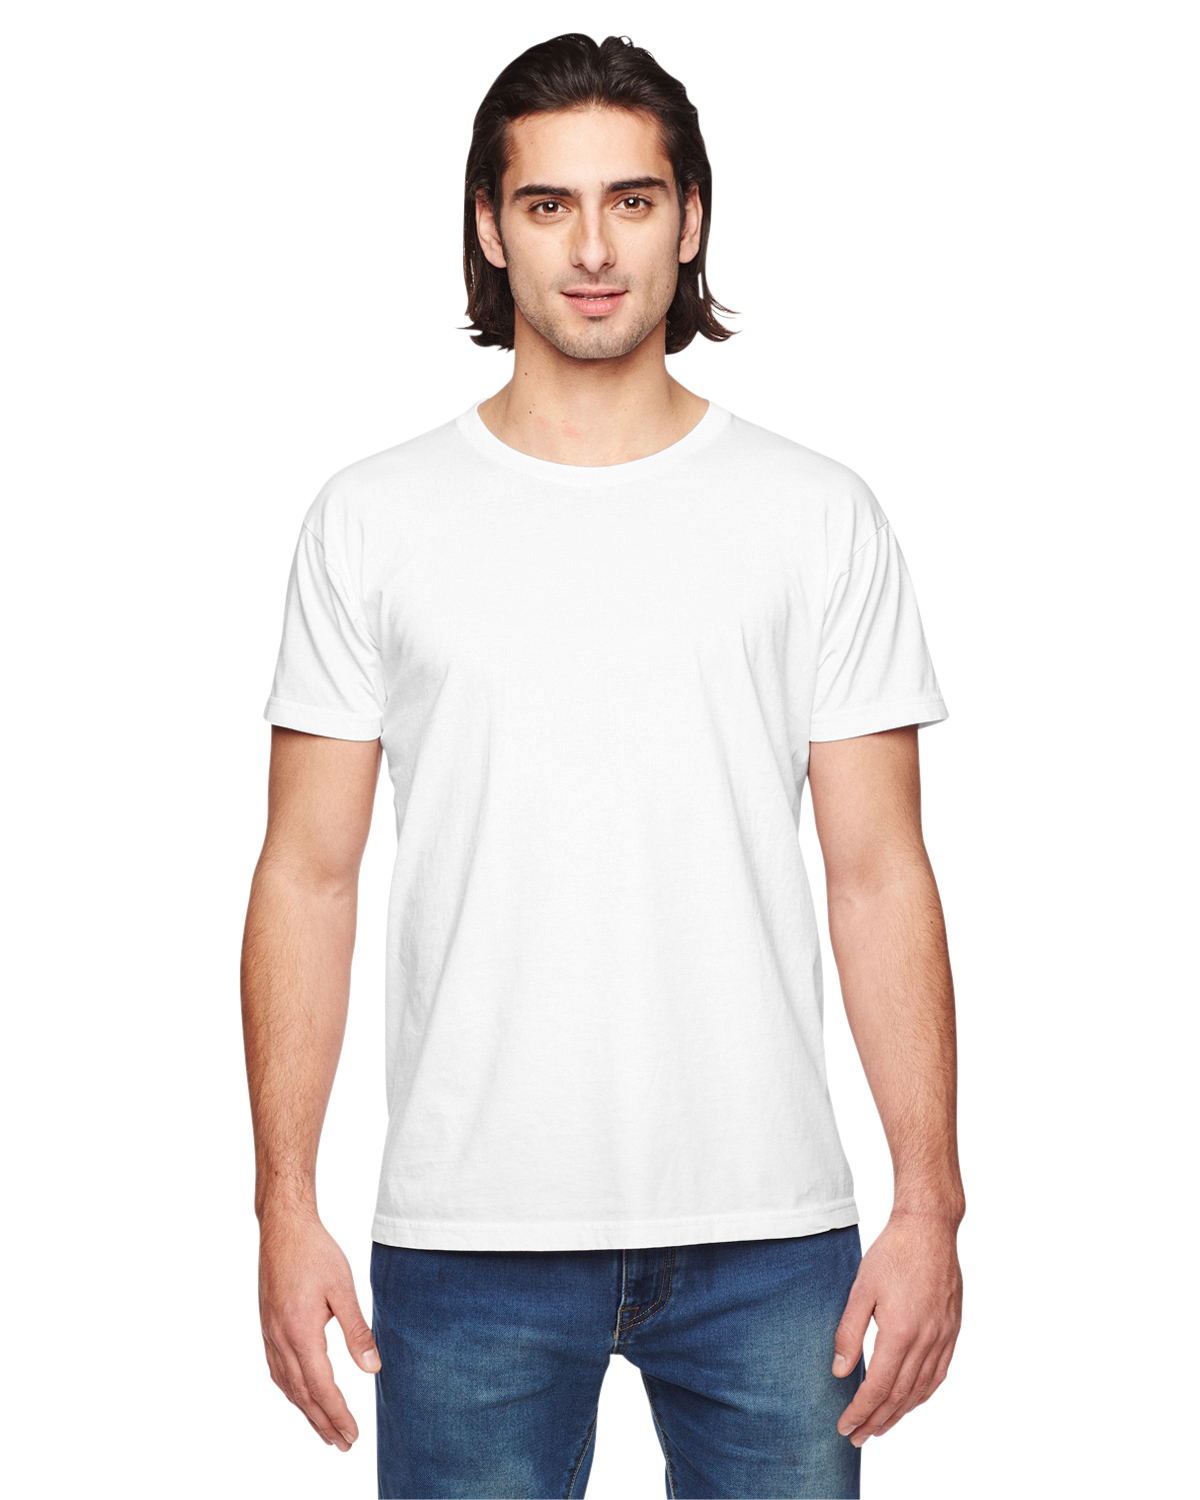 American Apparel 2011W - Unisex Power Washed T-Shirt